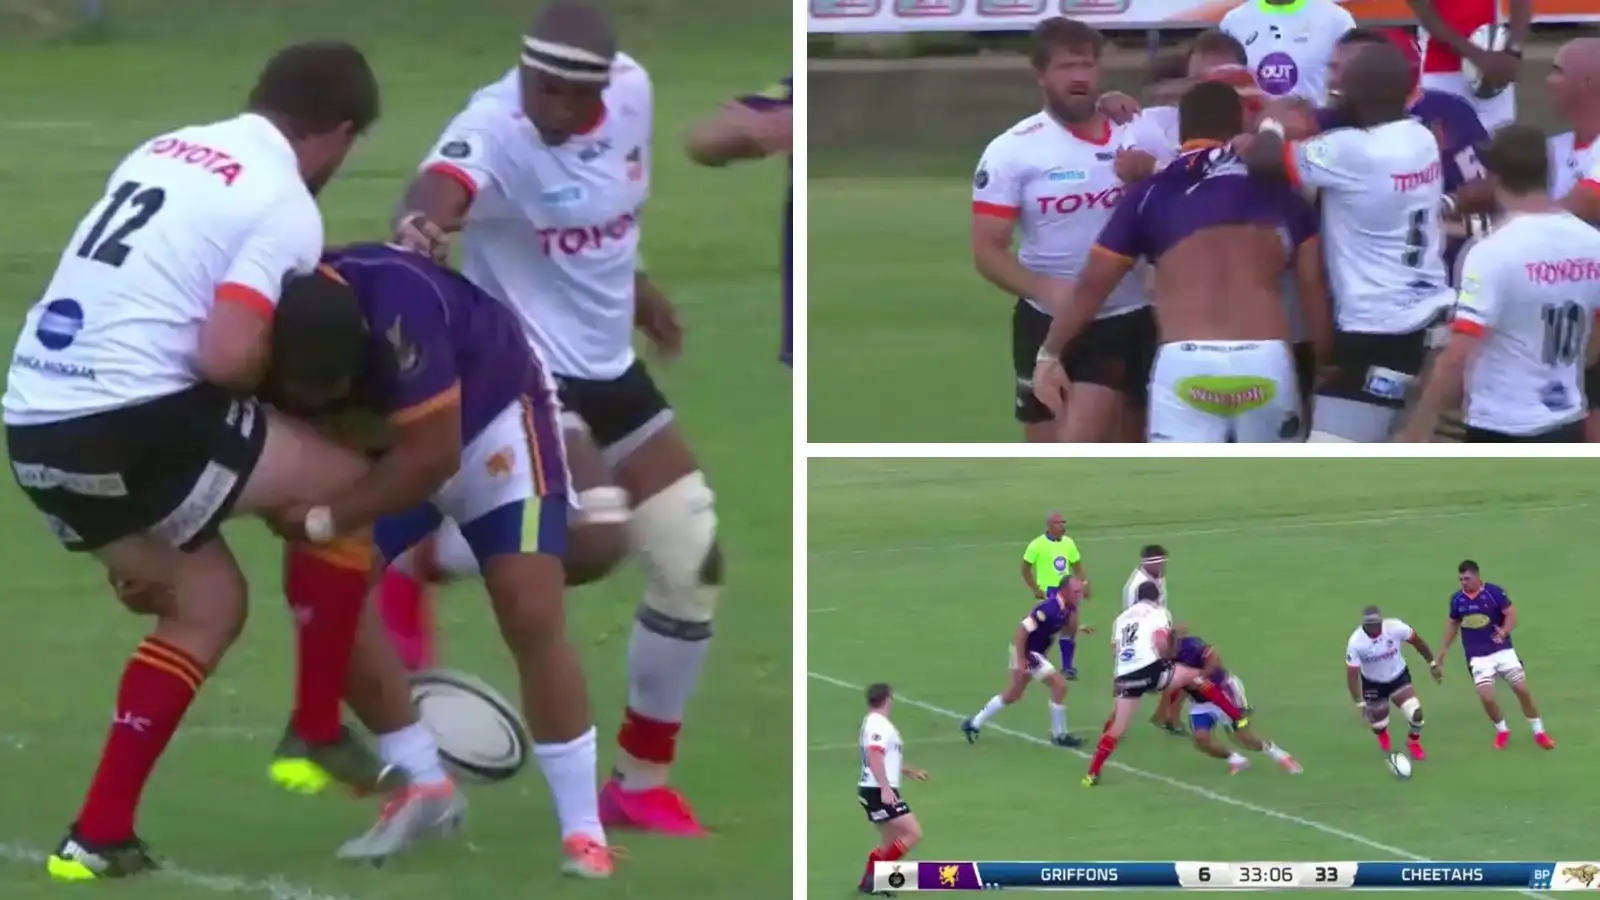 cheetahs Springbok veteran utility back Frans Steyn is used to dishing out punishment on the rugby pitch, but he recently got a taste of his own medicine in the Currie Cup.